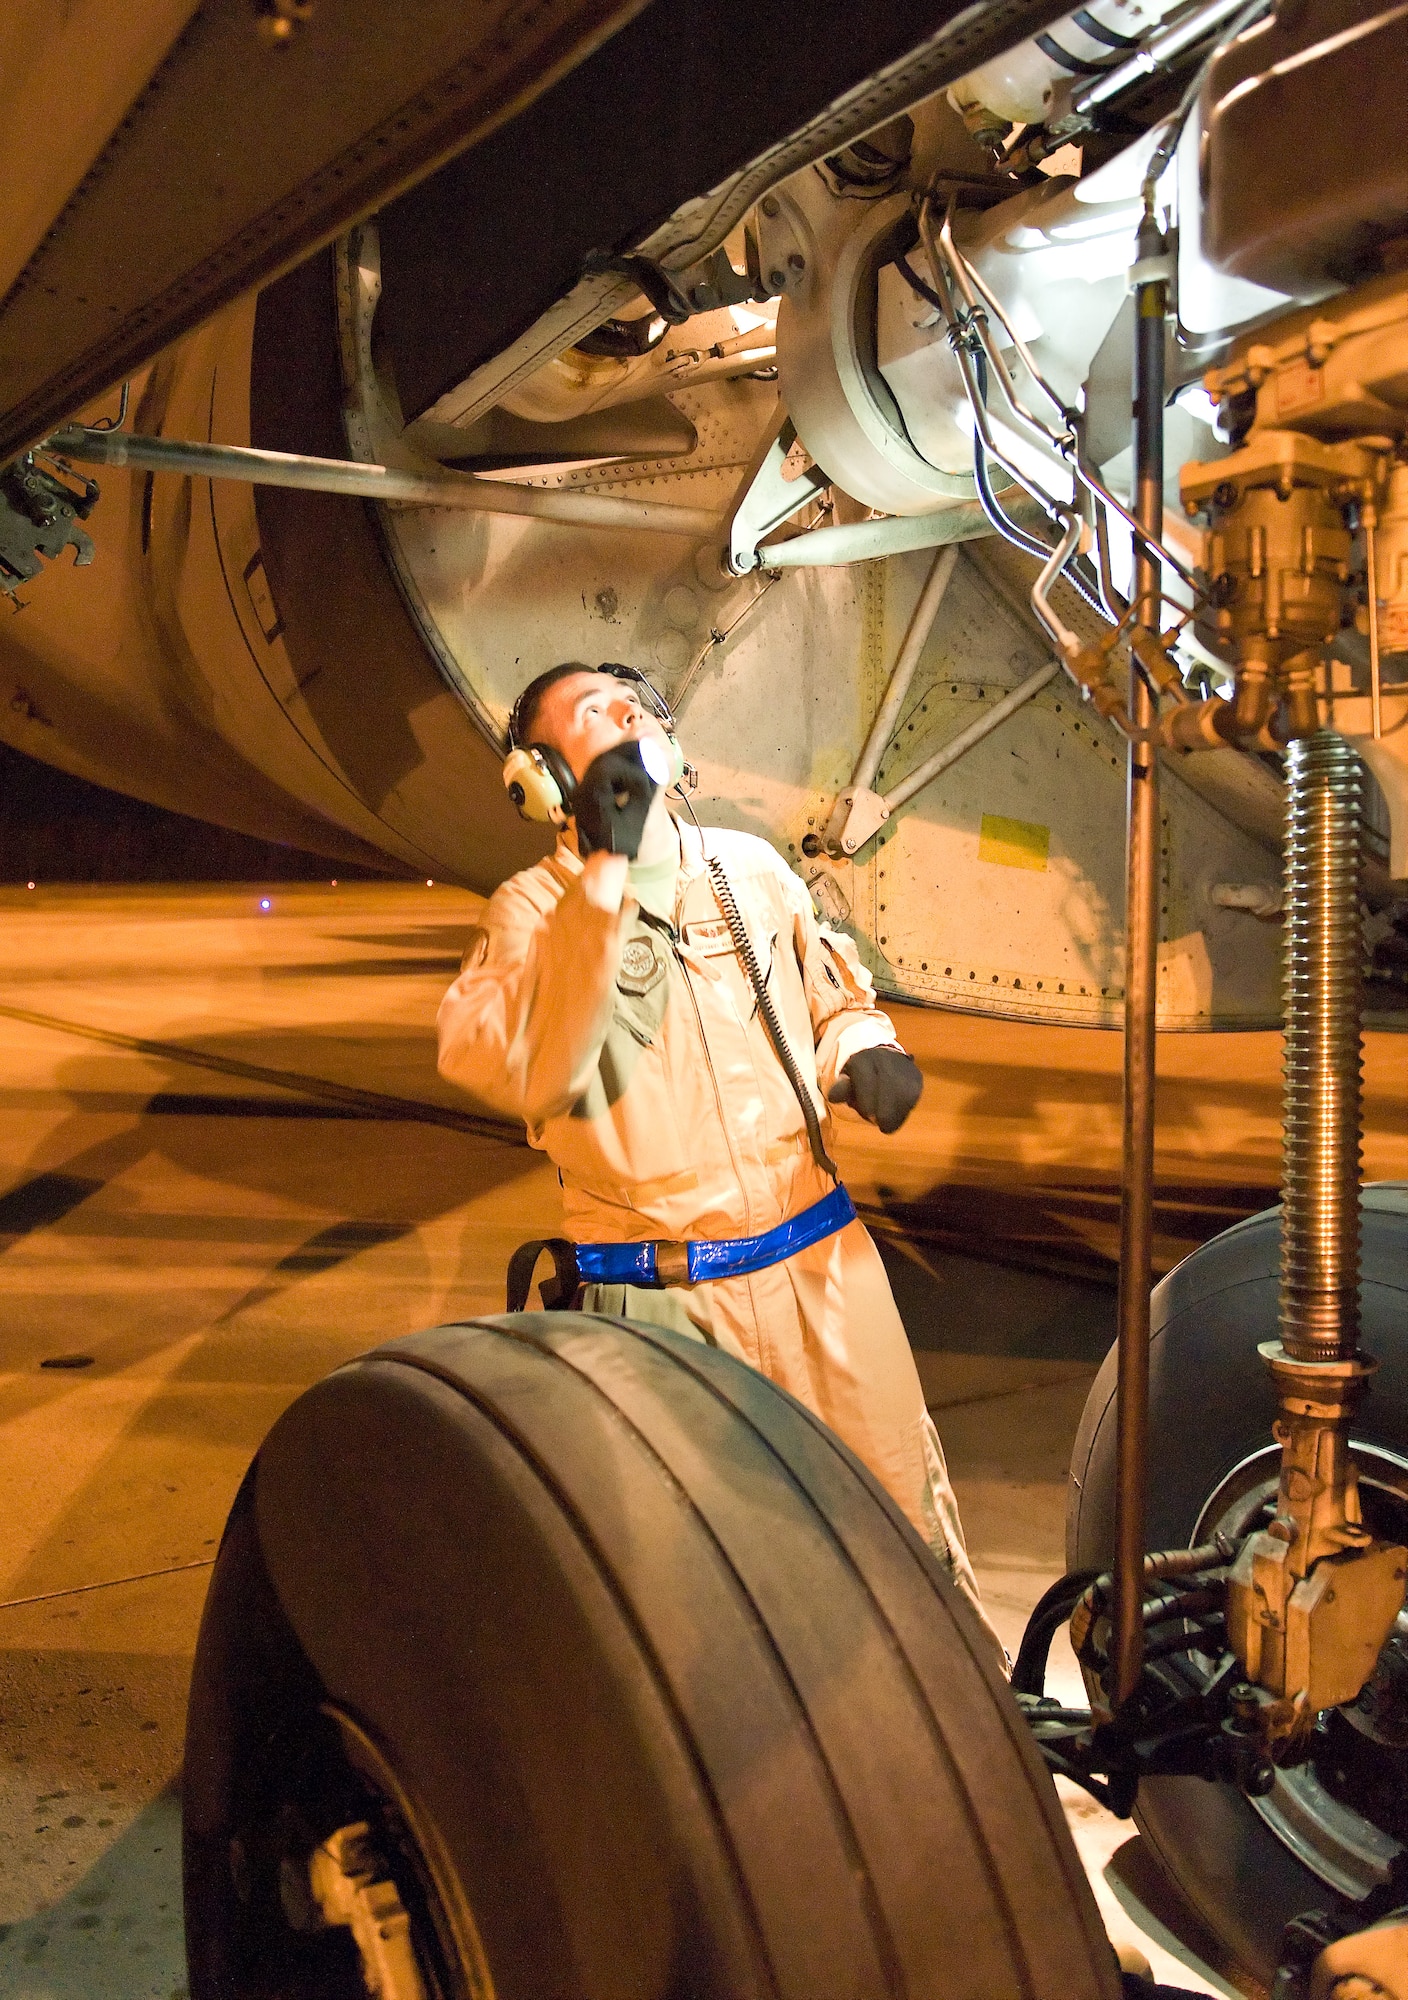 Staff Sgt. Daniel Wiltbank, a flight engineer with the 9th Airlift Squadron, inspects the main landing gear on a C-5B Galaxy during preflight March 8, 2012, at Dover Air Force Base, Del. The 9th Airlift Squadron now exclusively employs the C-5M Super Galaxy for local training, and state-side and overseas missions. (U.S. Air Force photo by Roland Balik)